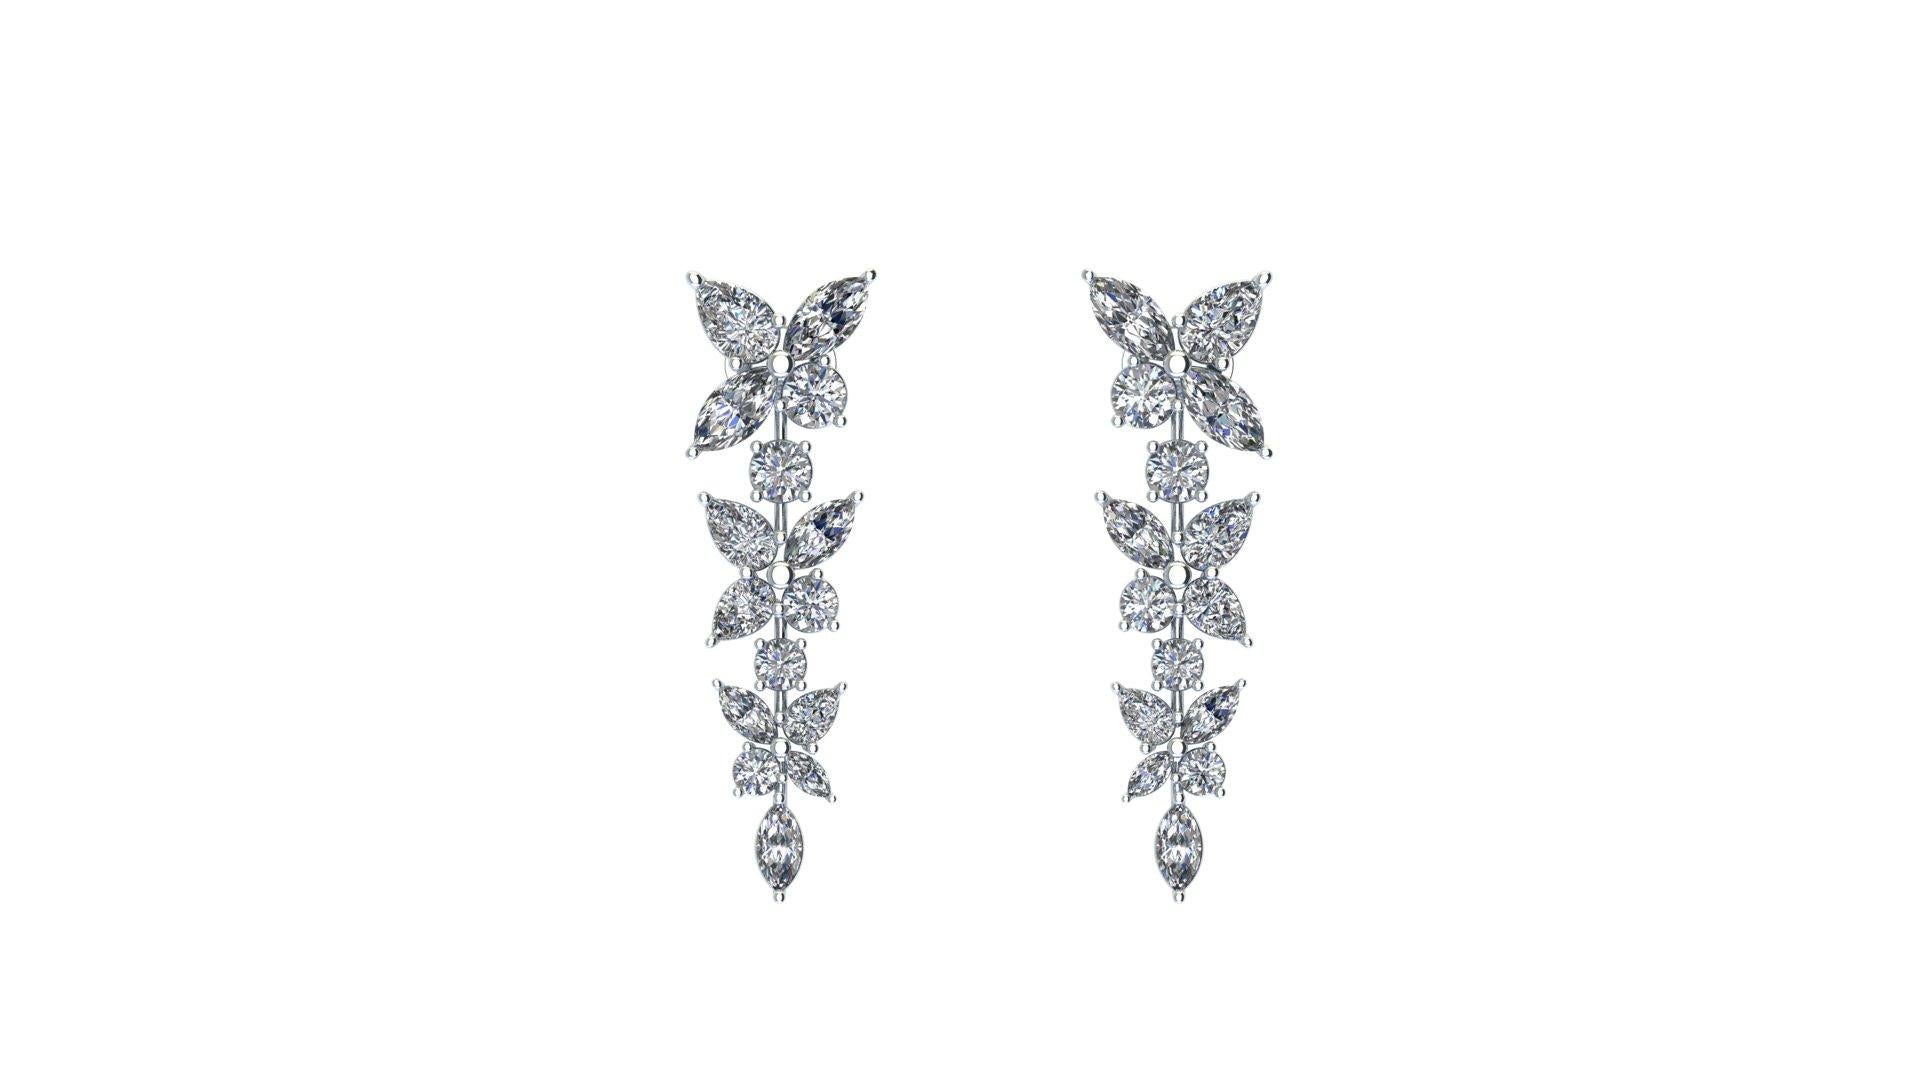 4.45 carats Marquise Diamond Cascade earrings made in Platinum in New York, excellent sparkle, sophisticated look, fine and elegant, comfortable, ideal for special occasions, anniversaries, weddings, push present.
The selected matching diamonds are